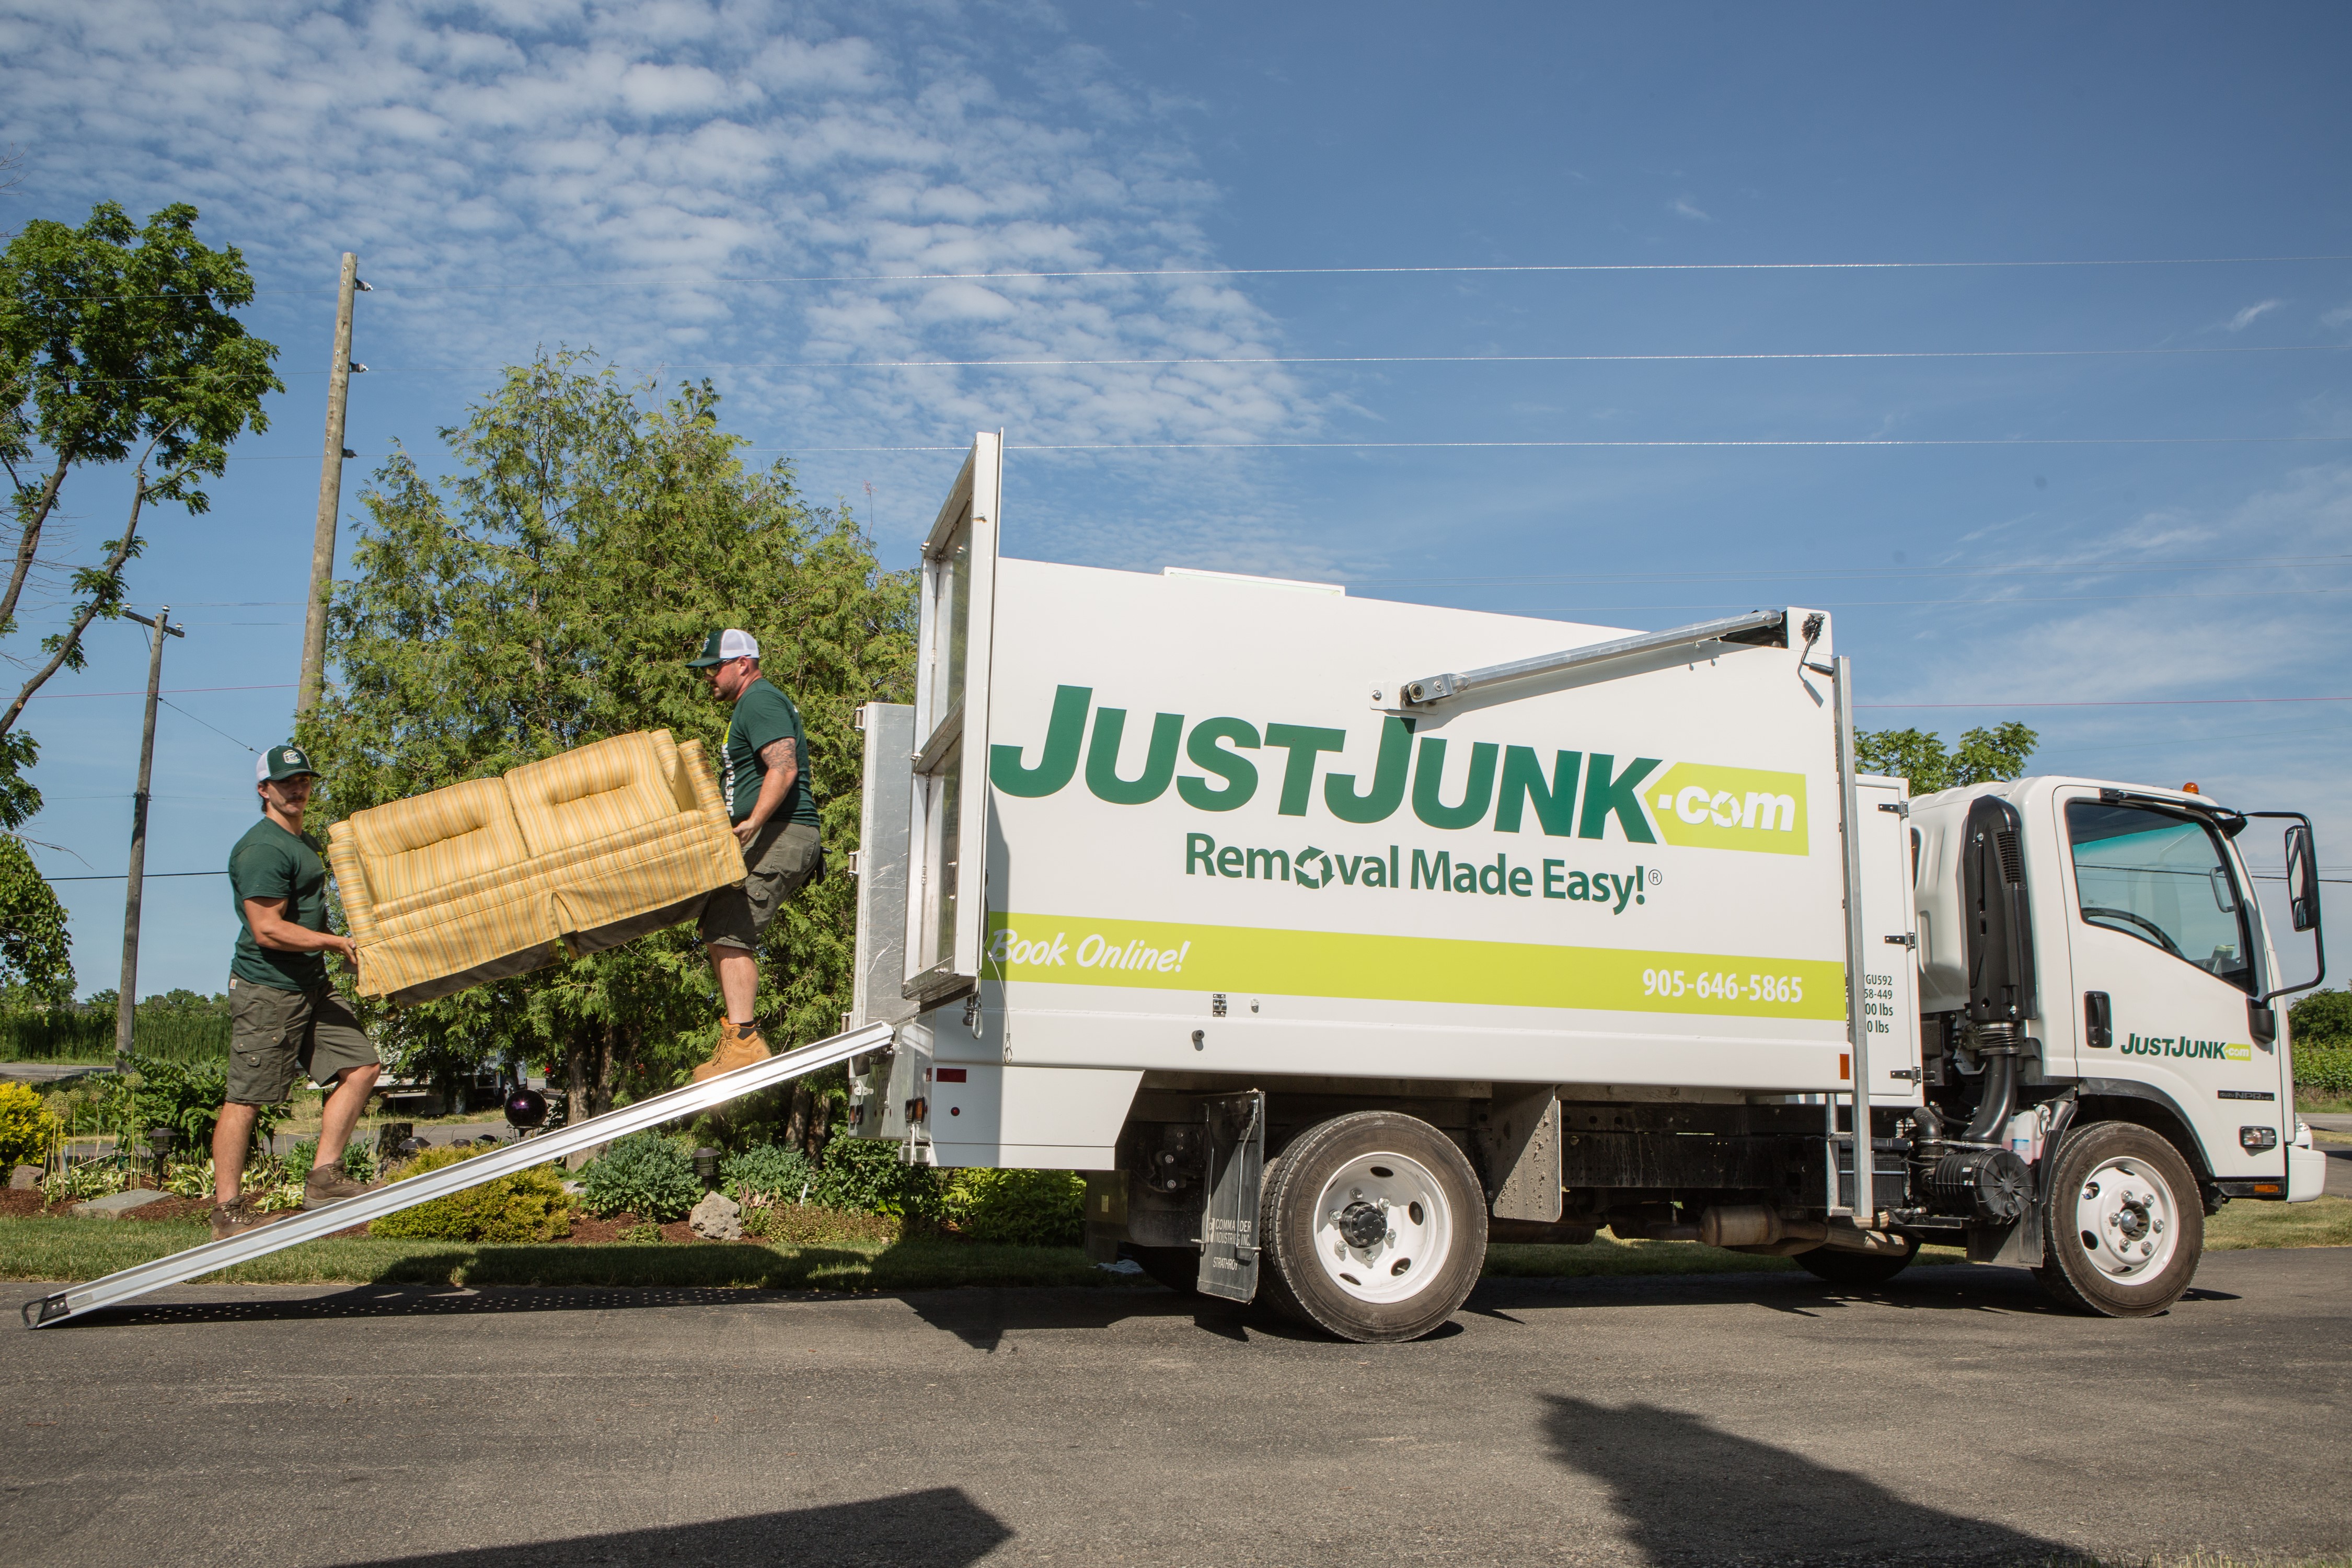 Just Junk Service - Junk removal and Downsizing Calgary 